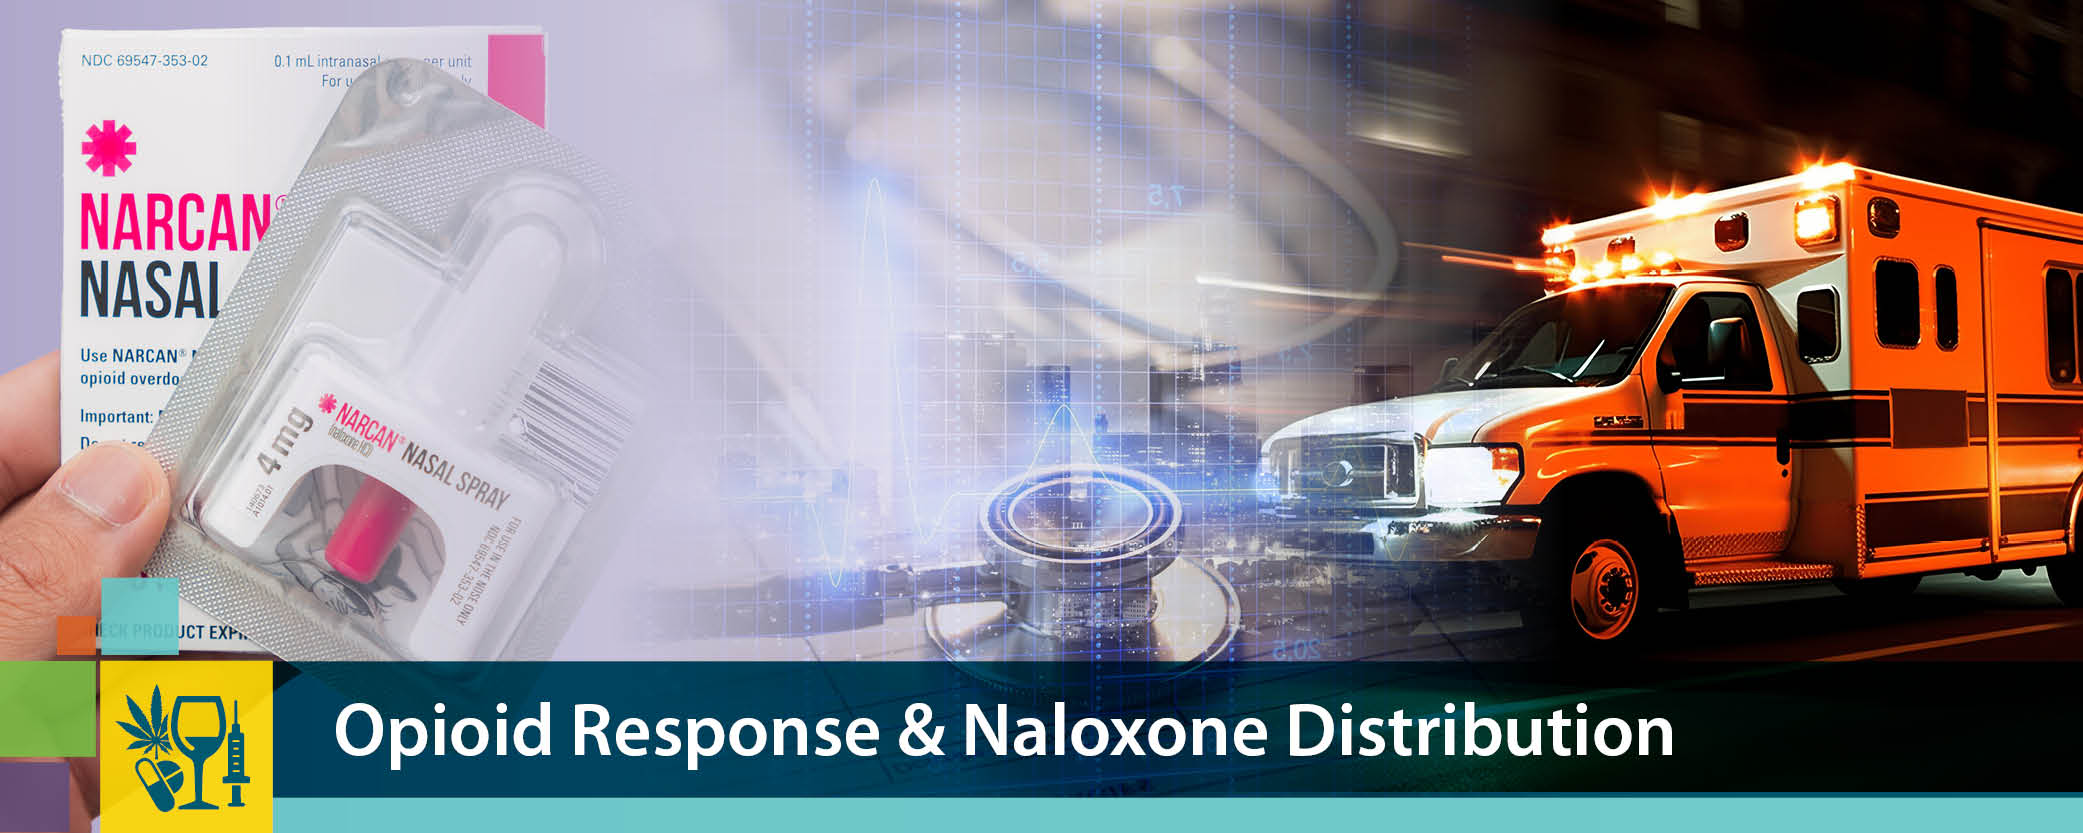 Annual report section banner - Opioid Response and Naloxone Distribution